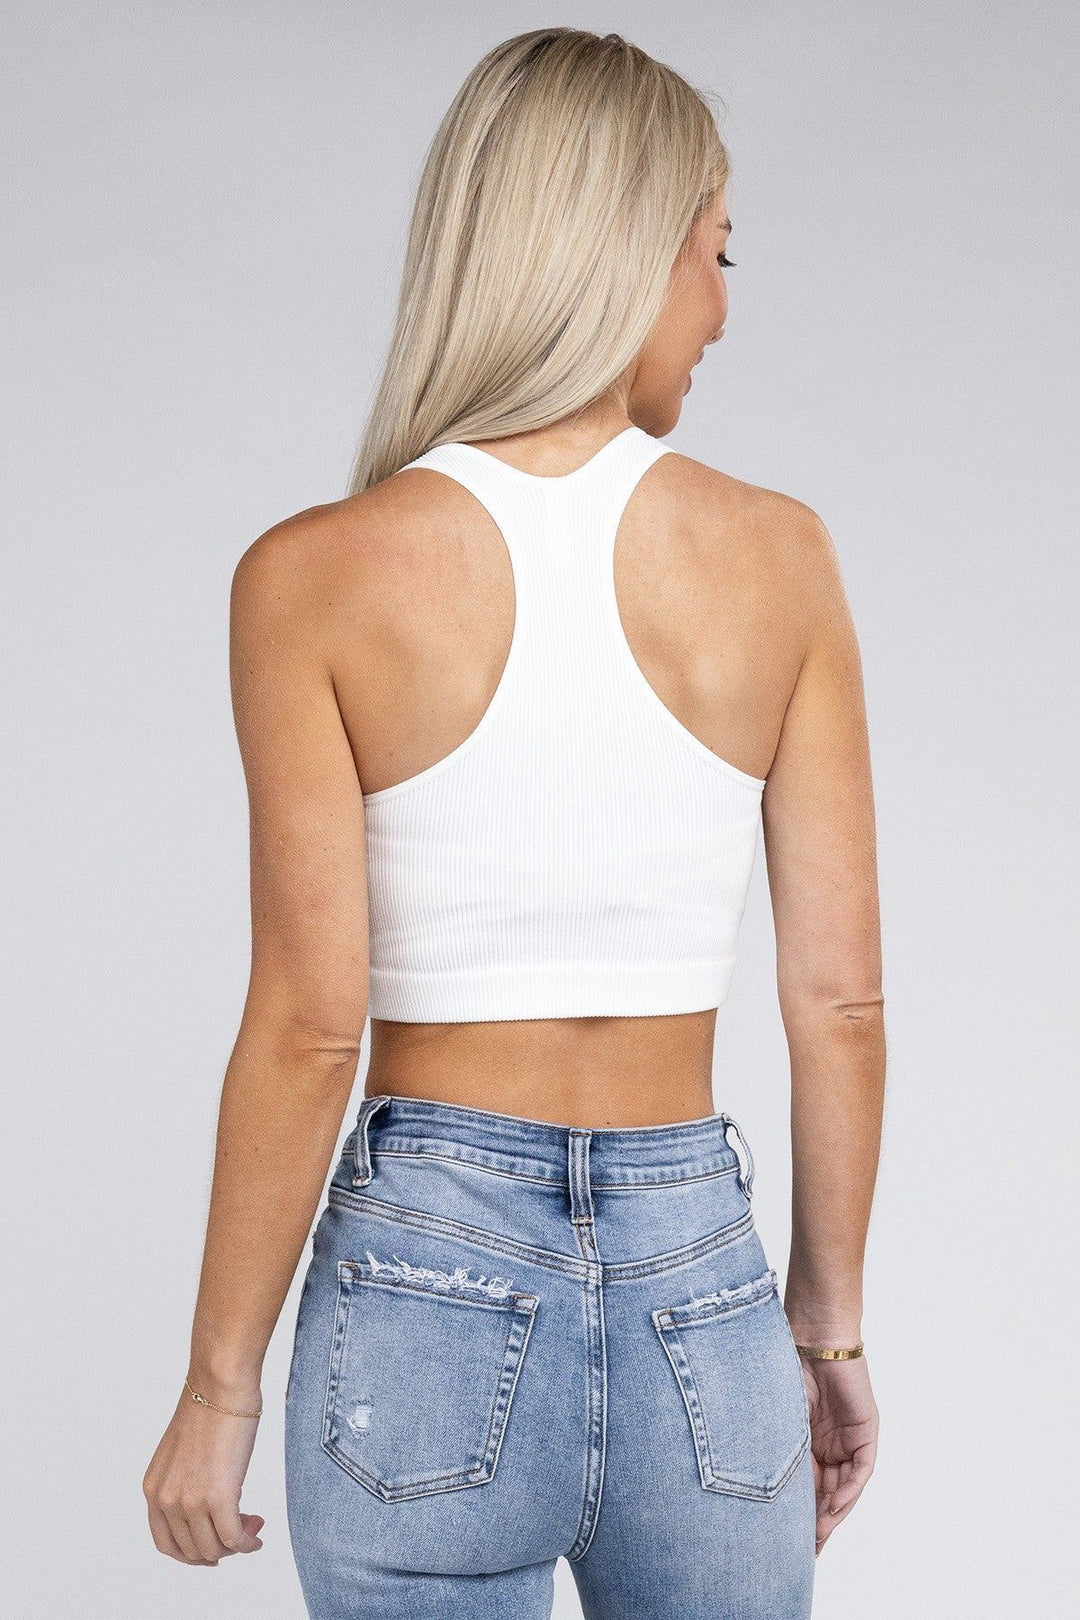 Zenana Ribbed Cropped Racerback Tank Top - Inspired Eye Boutique